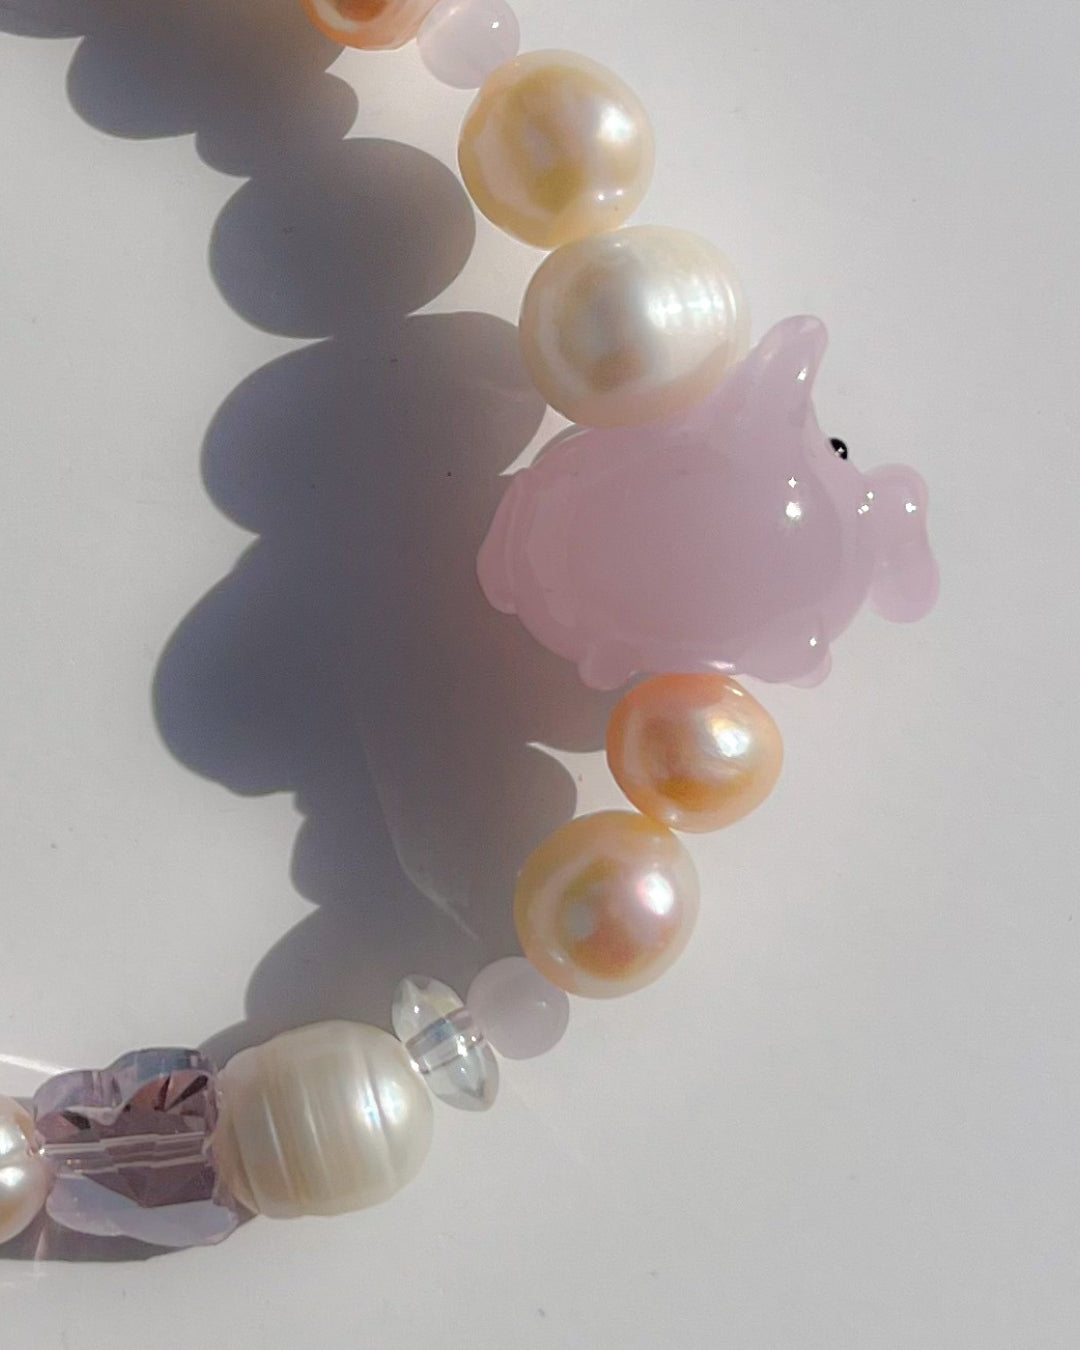 A close up studio shot of Buttercup Studio's Pink Piggie Freshwater Pearls Bracelet. Features assorted freshwater pearls, sheer pink beads and a special lampwork glass pink pig bead.